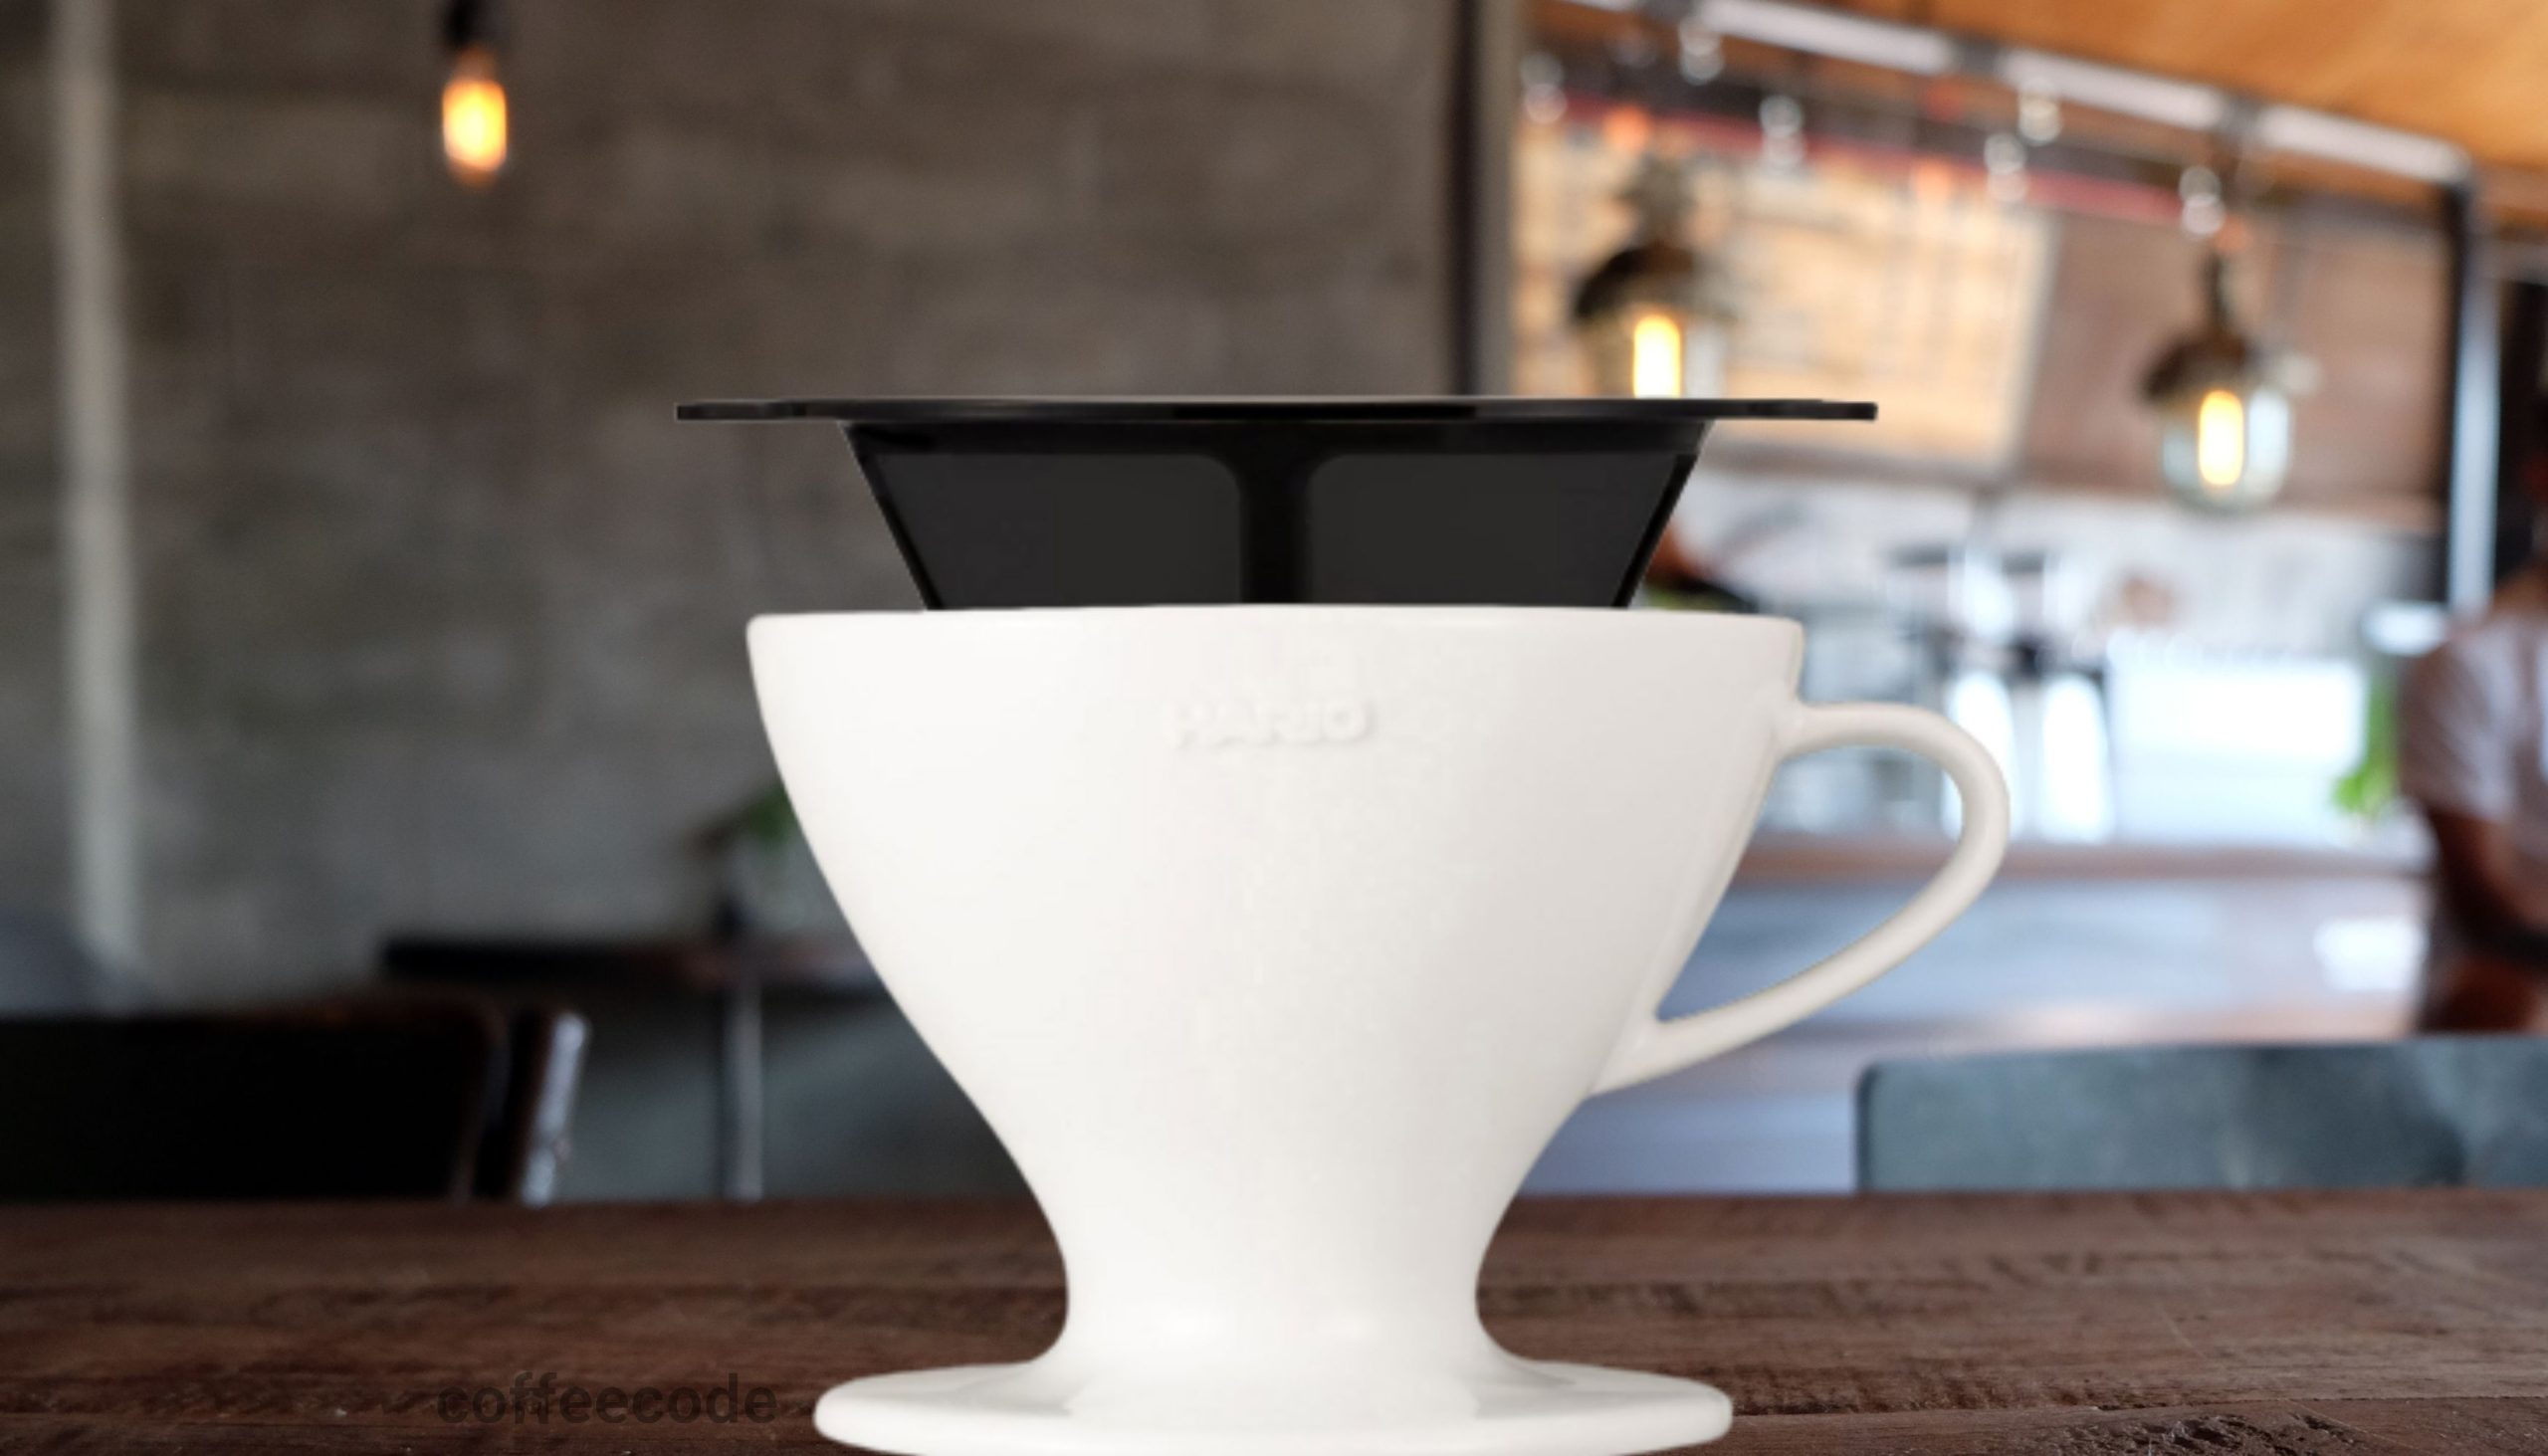 The new Hario W60 Dripper Reviewed